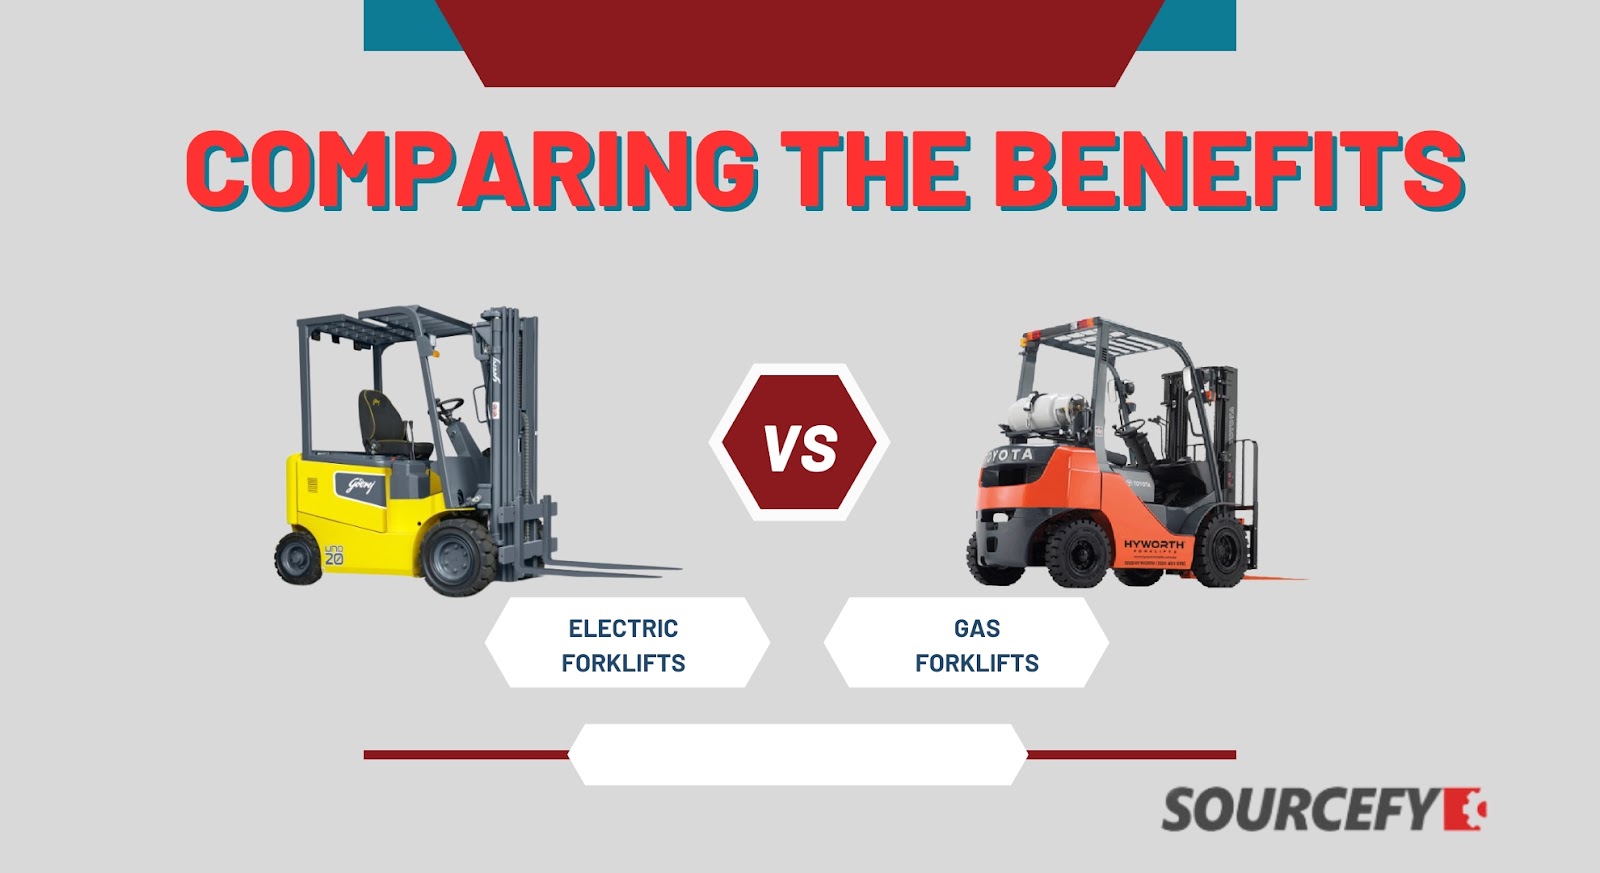 Comparing the Benefits of Electric and Gas Forklift